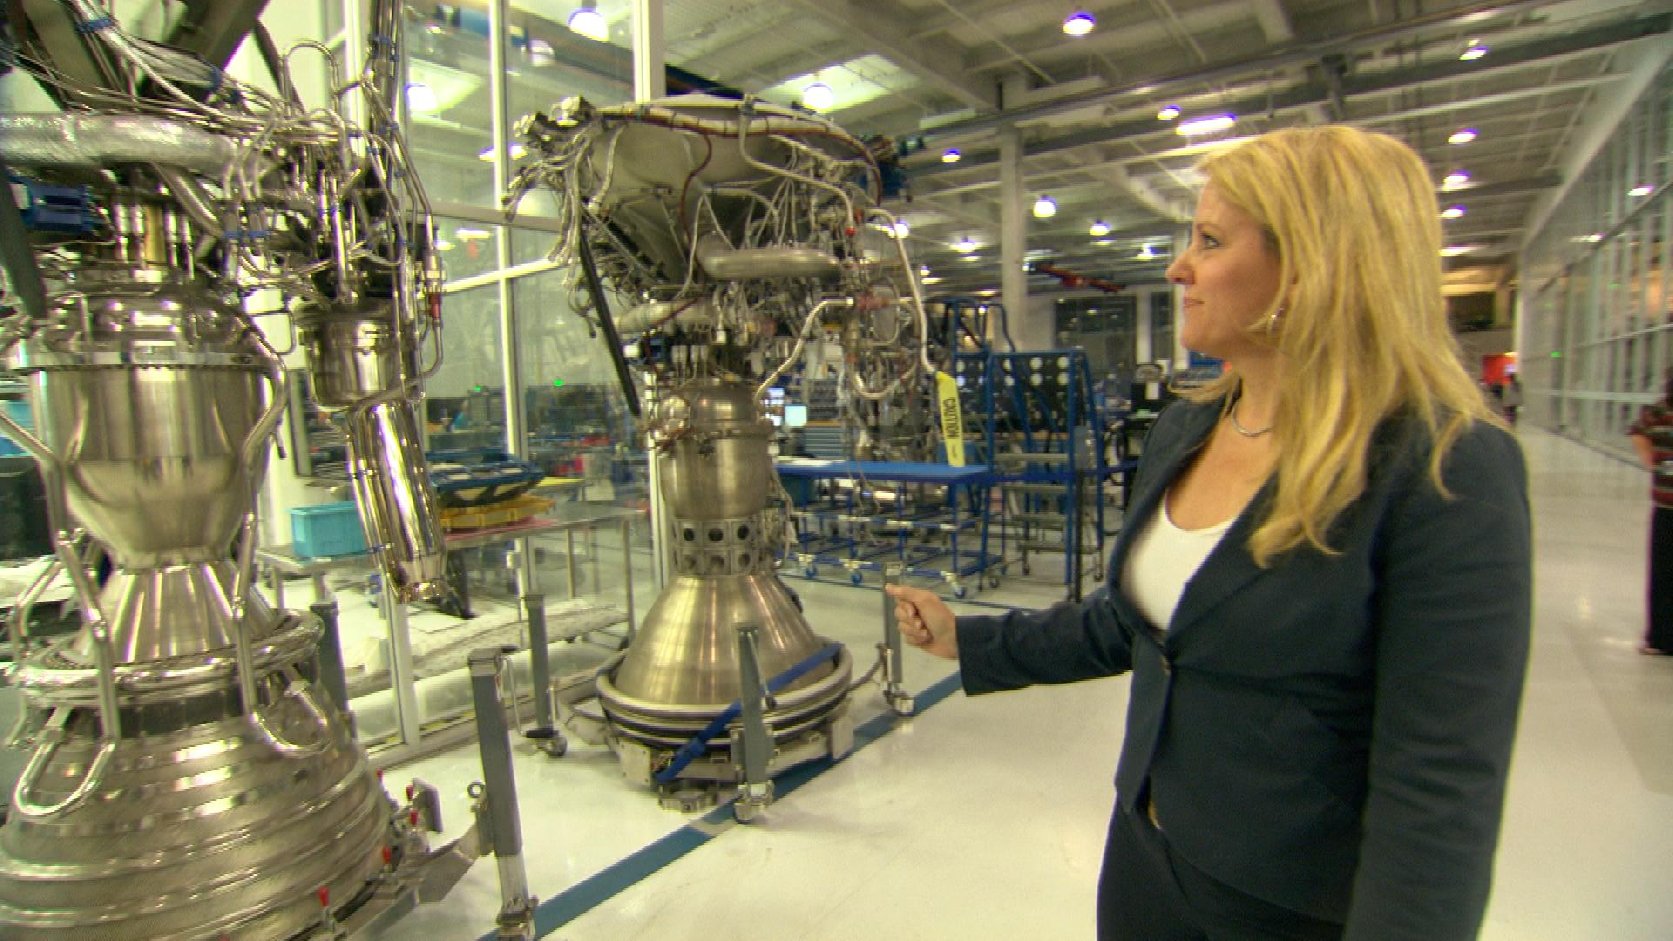 Gwynne Shotwell, President and COO of SpaceX, shows off rocket engines being built at the company's headquarters near L.A. Image by Jayme Roy